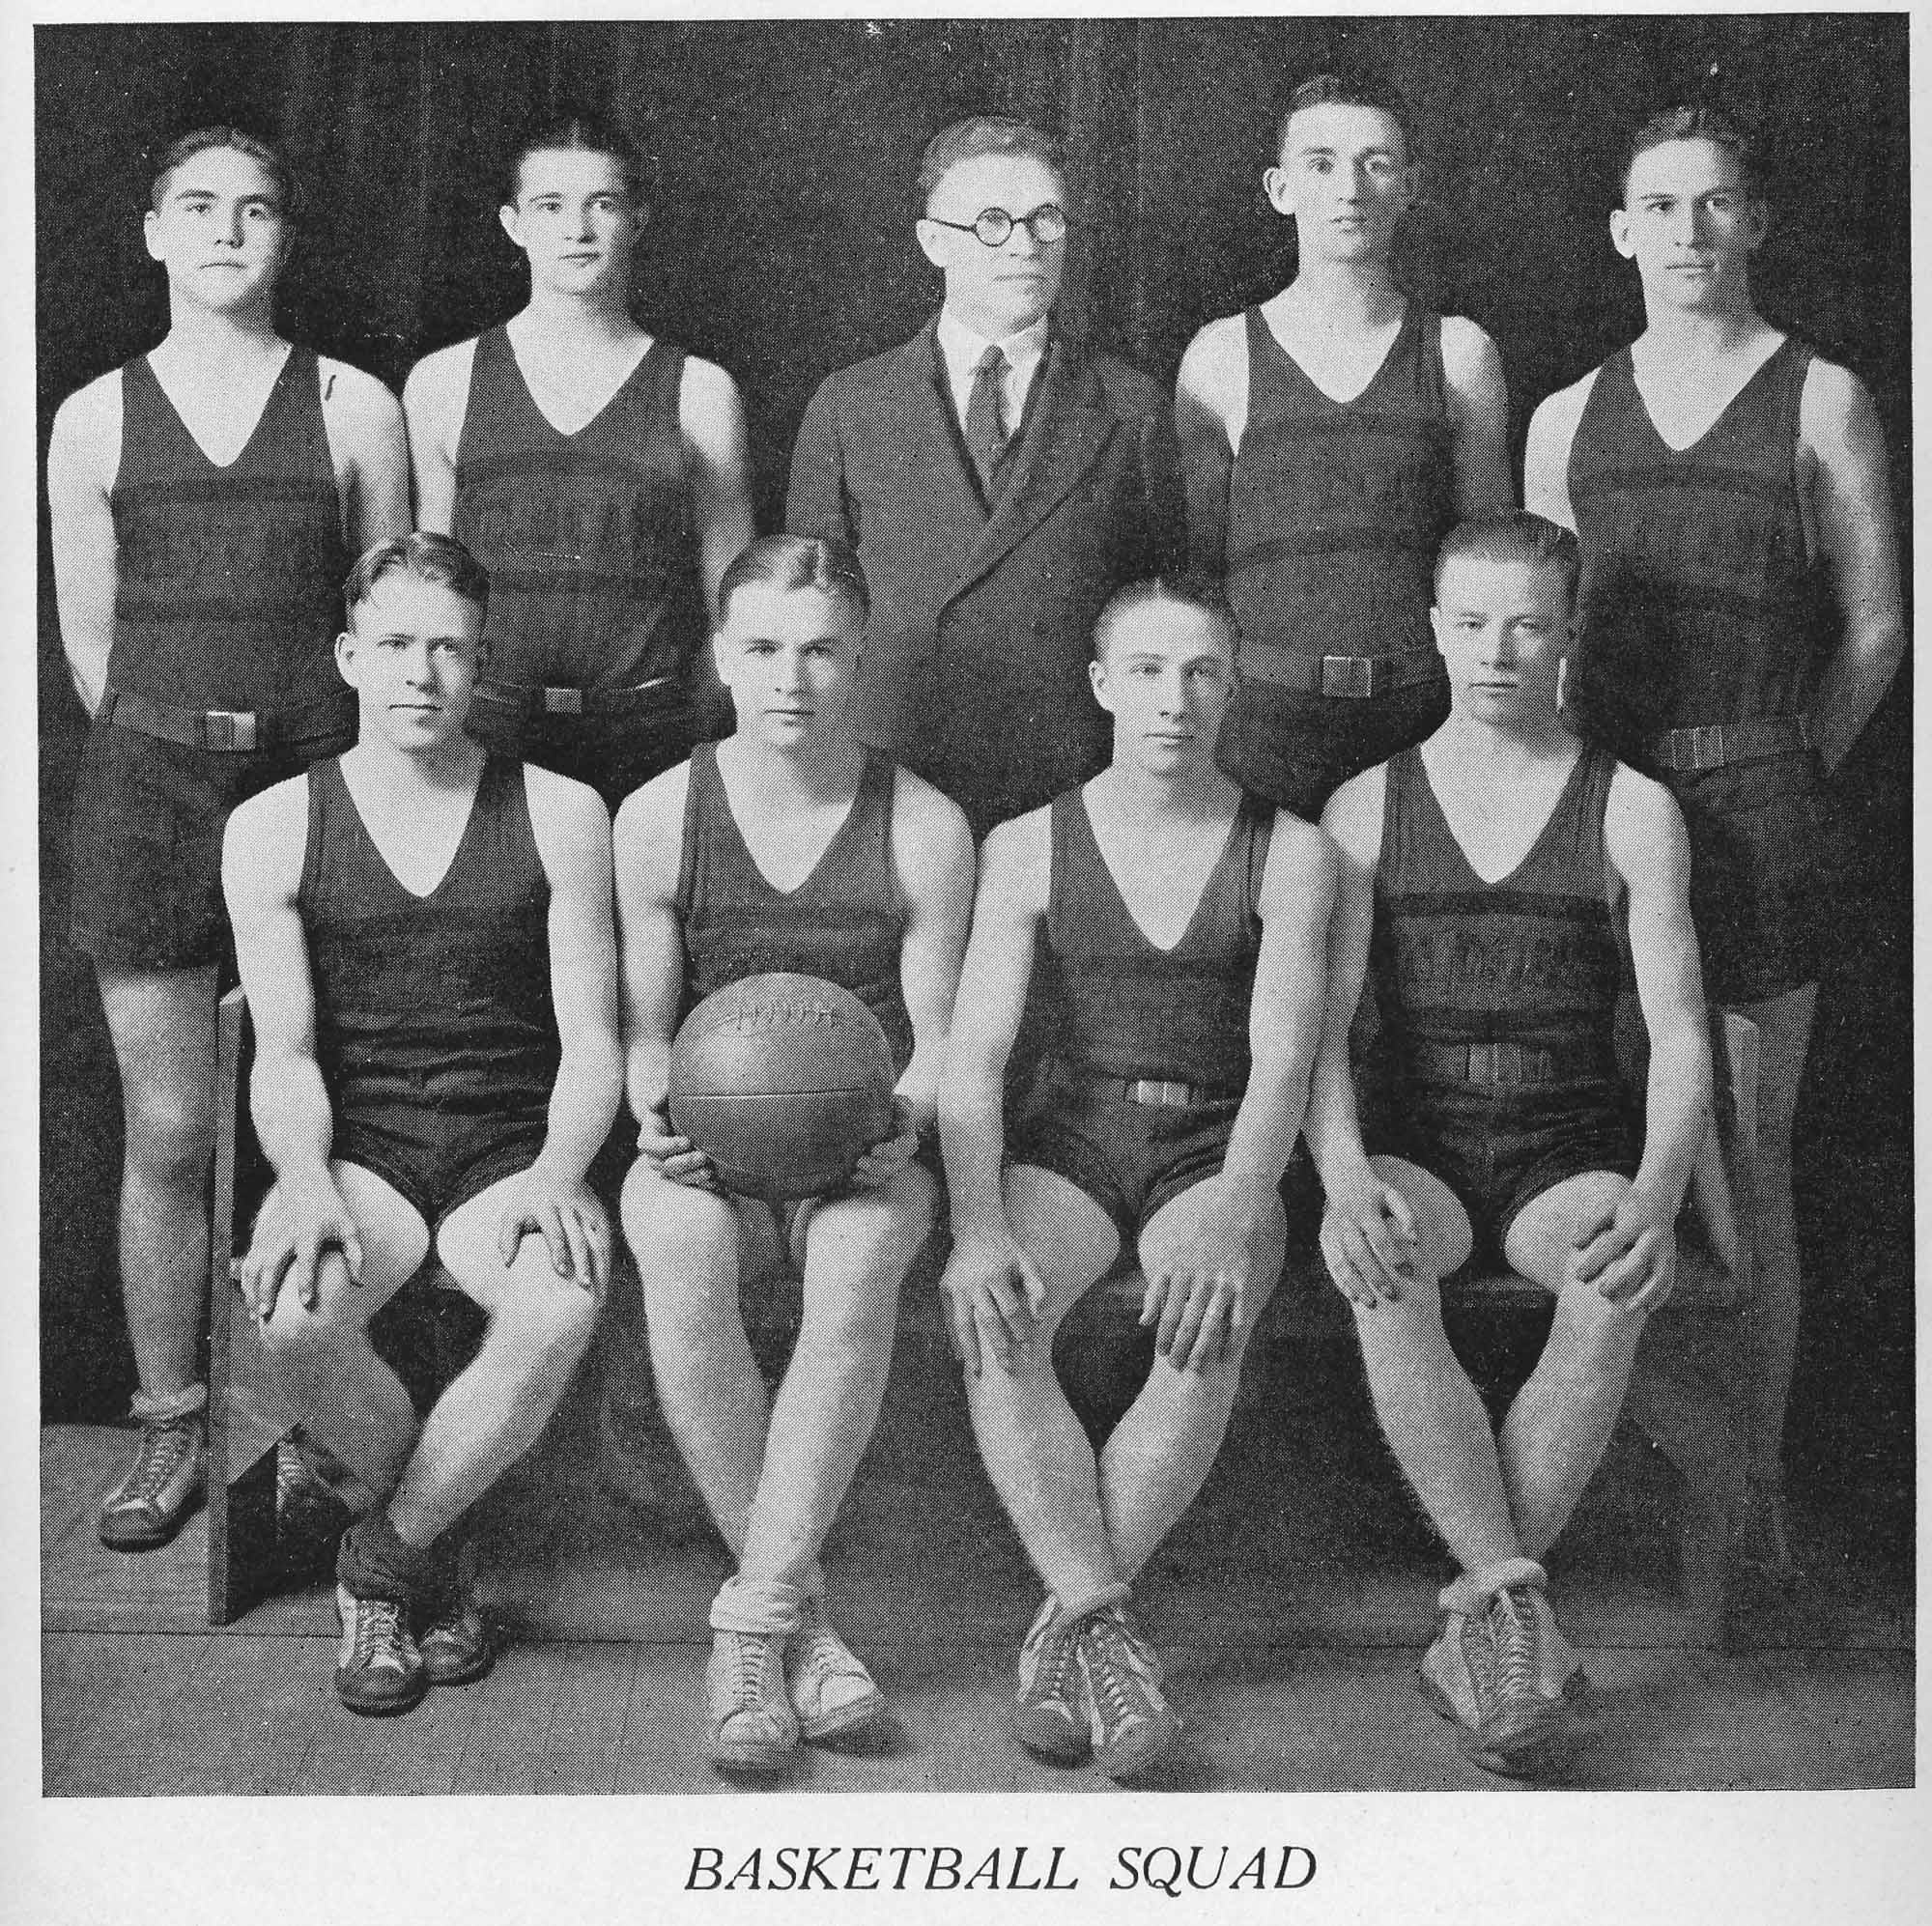 Dauth Family Archive - 1923 - Spud Yearbook - June Dauth Spud Basketball Squad Photo